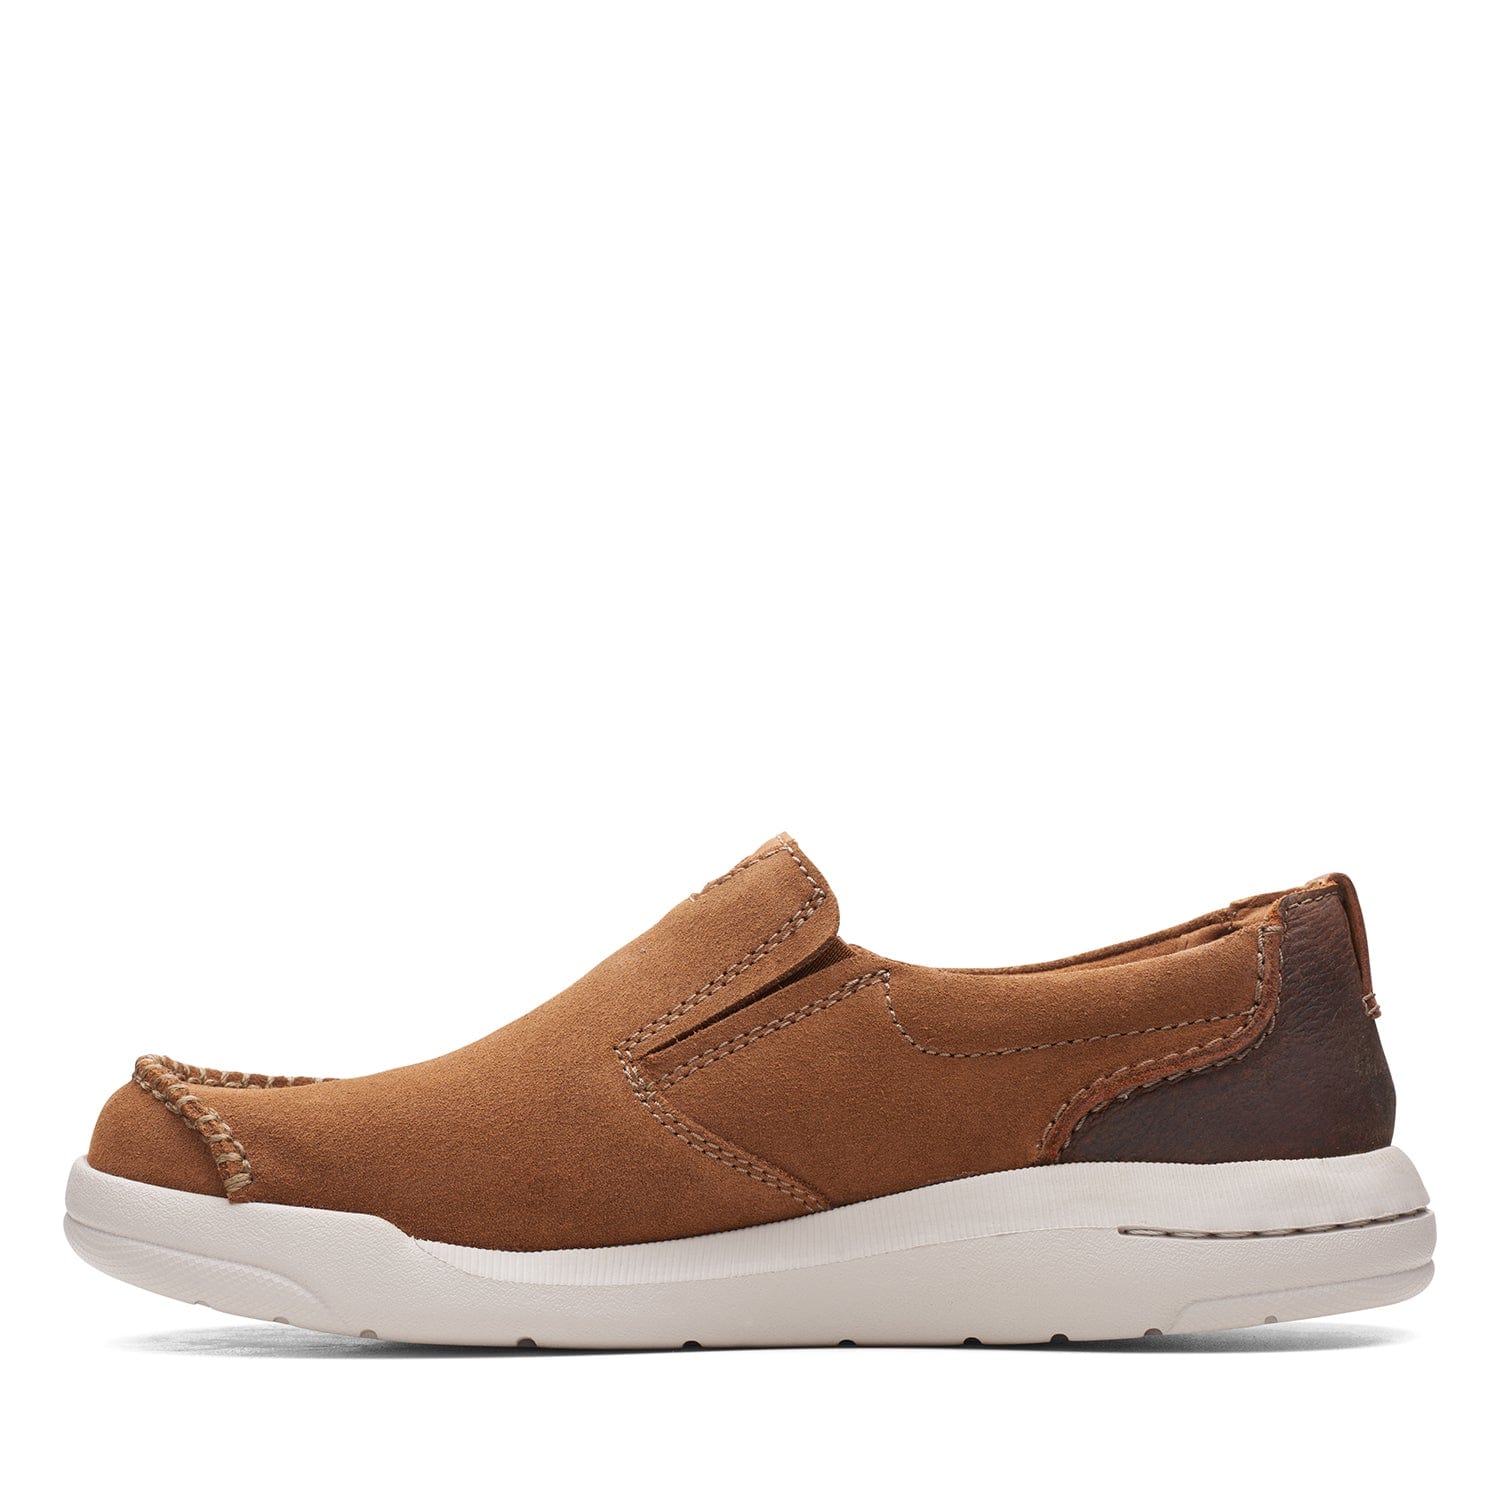 Clarks Driftway Step Shoes - Tan Suede - 261638567 - G Width (Standard Fit)